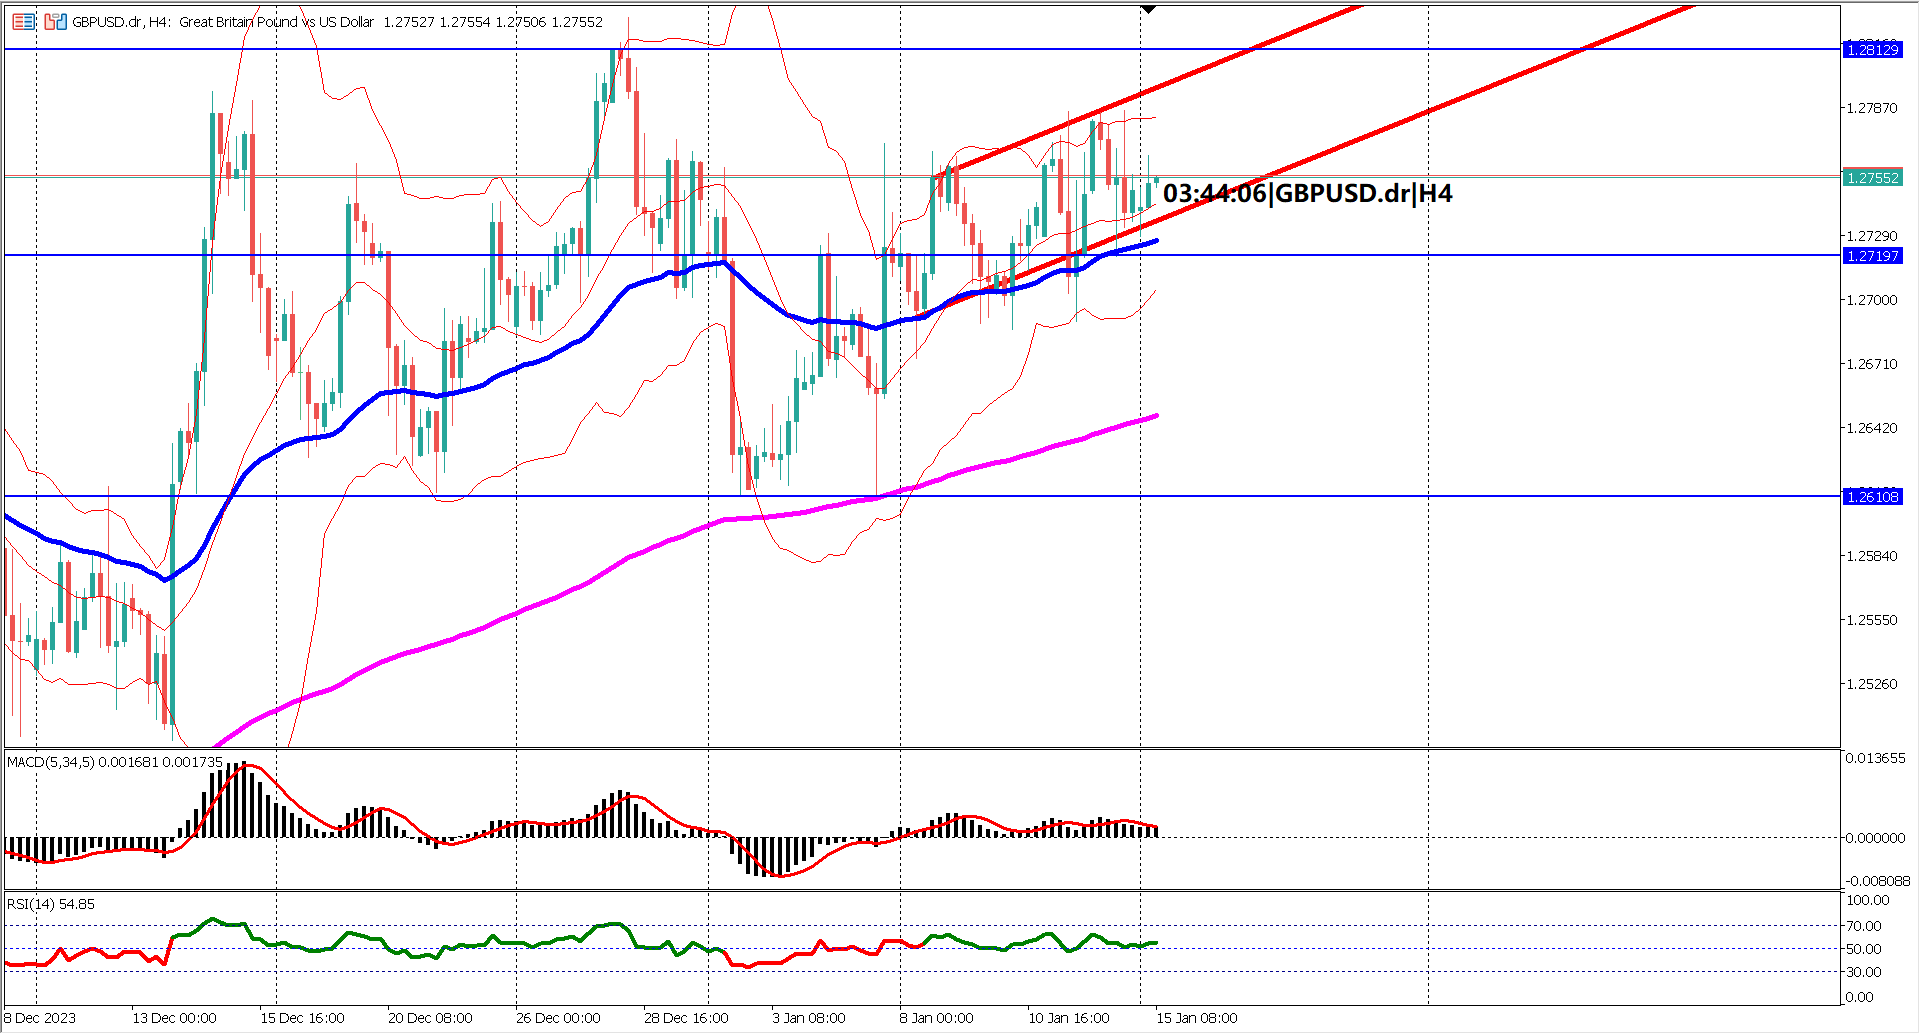 GBPUSD: Technicals Tell a Bullish Story, But Will UK Inflation Data Spoil the Party?